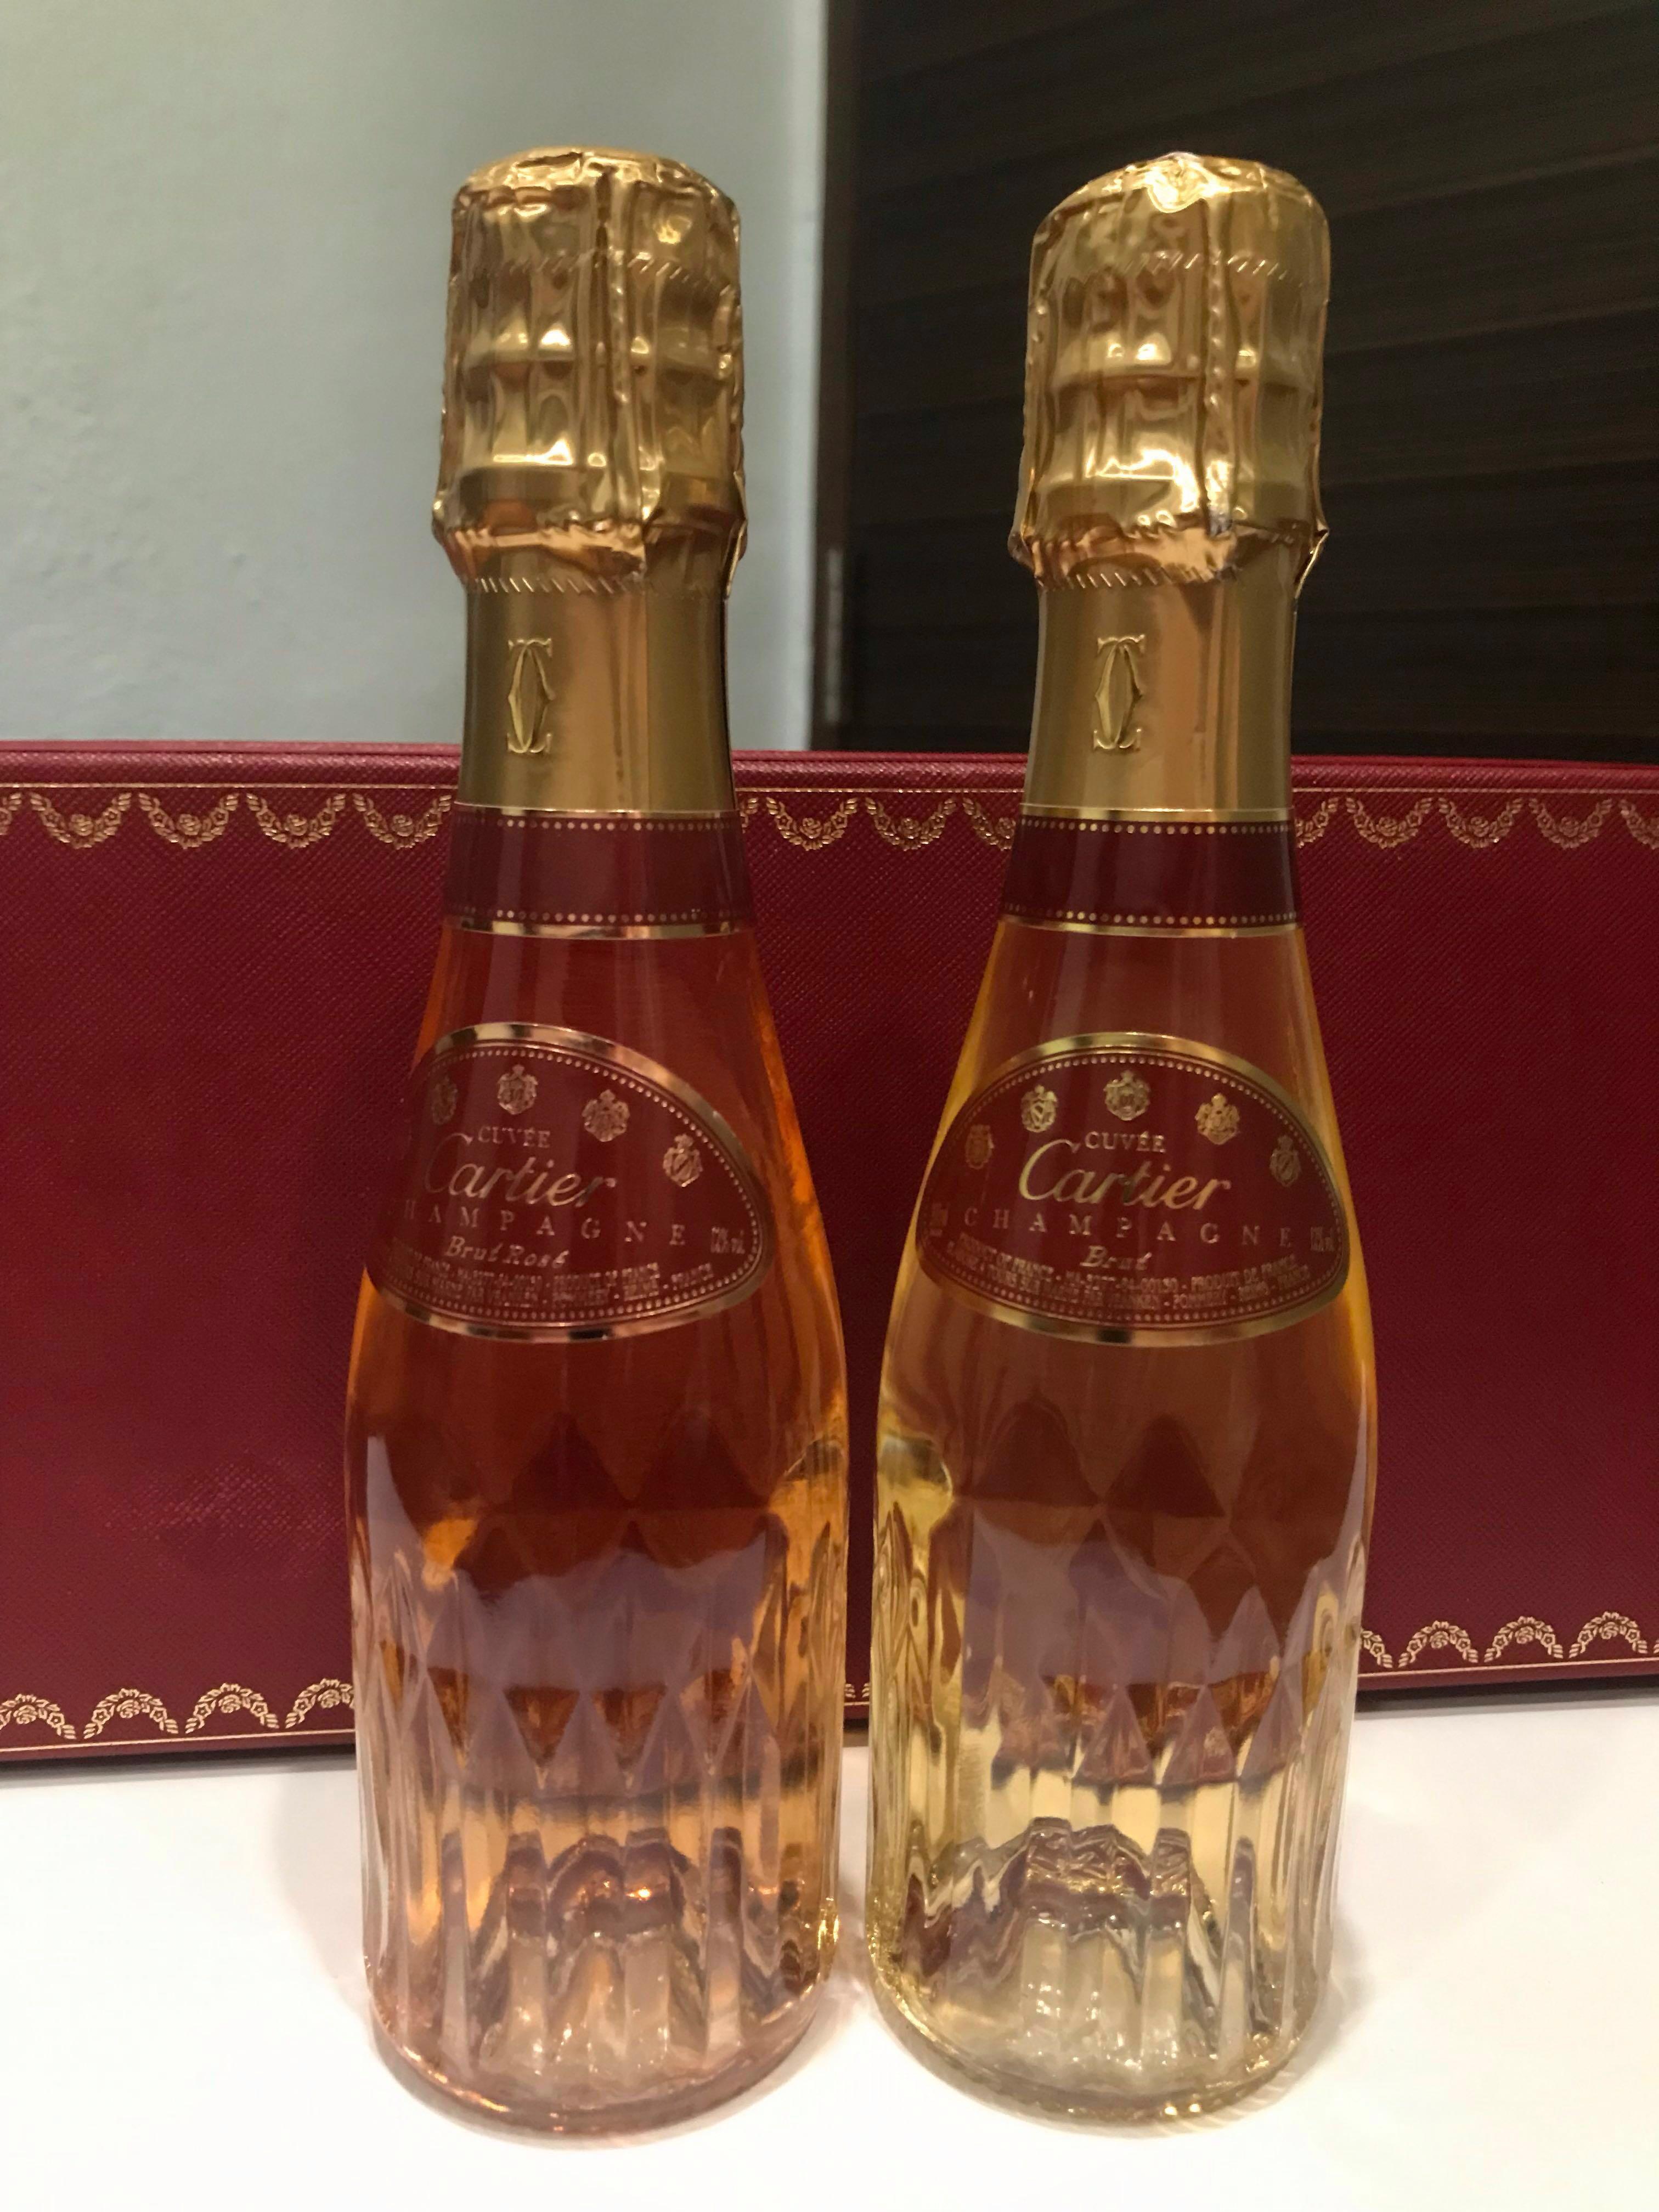 cartier champagne bottle price